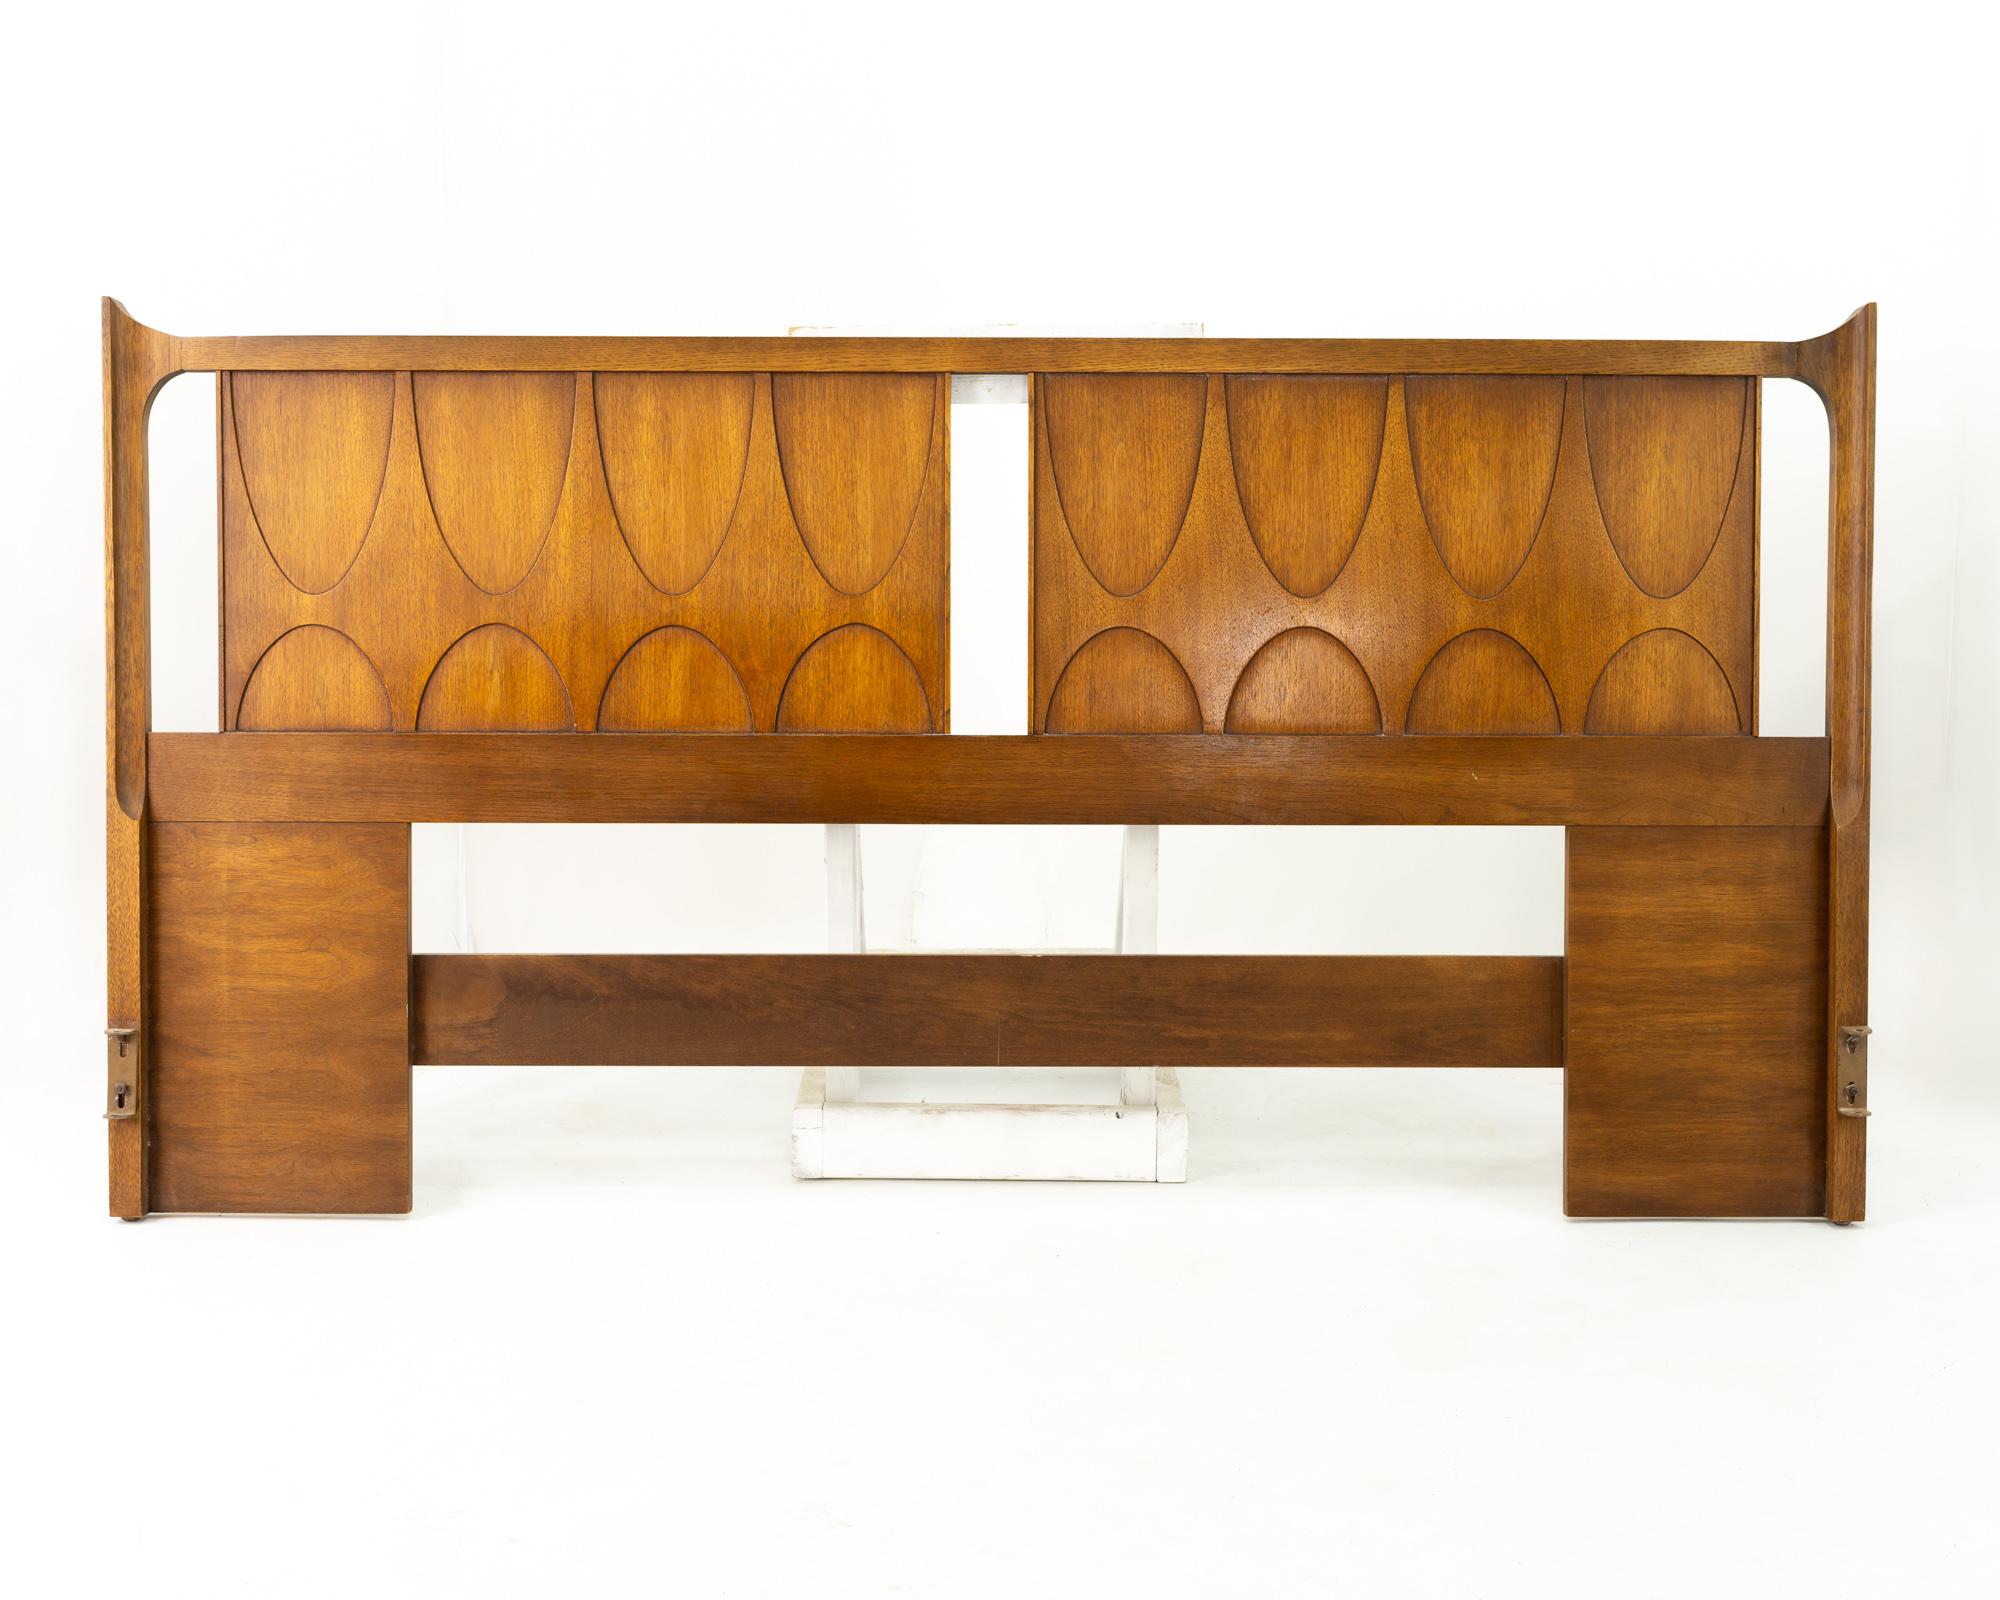 Broyhill Brasilia mid century walnut king headboard

Headboard measures: 78.25 wide x 3 deep x 41 inches high

All pieces of furniture can be had in what we call restored vintage condition. That means the piece is restored upon purchase so it’s